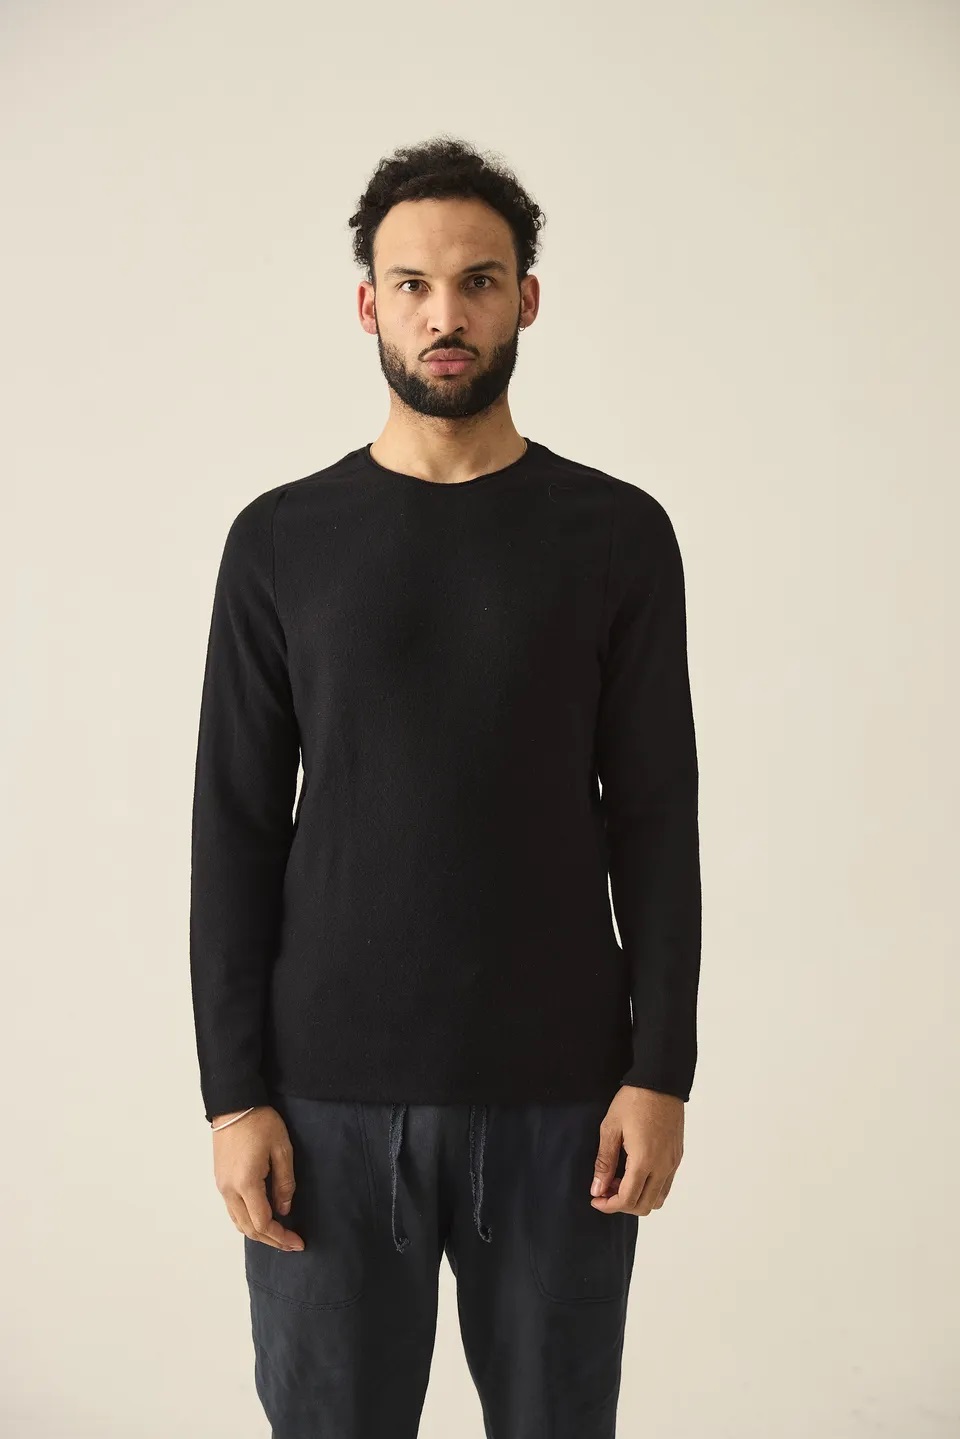 HANNIBAL. Knit Pullover Nevio in Charcoal 54